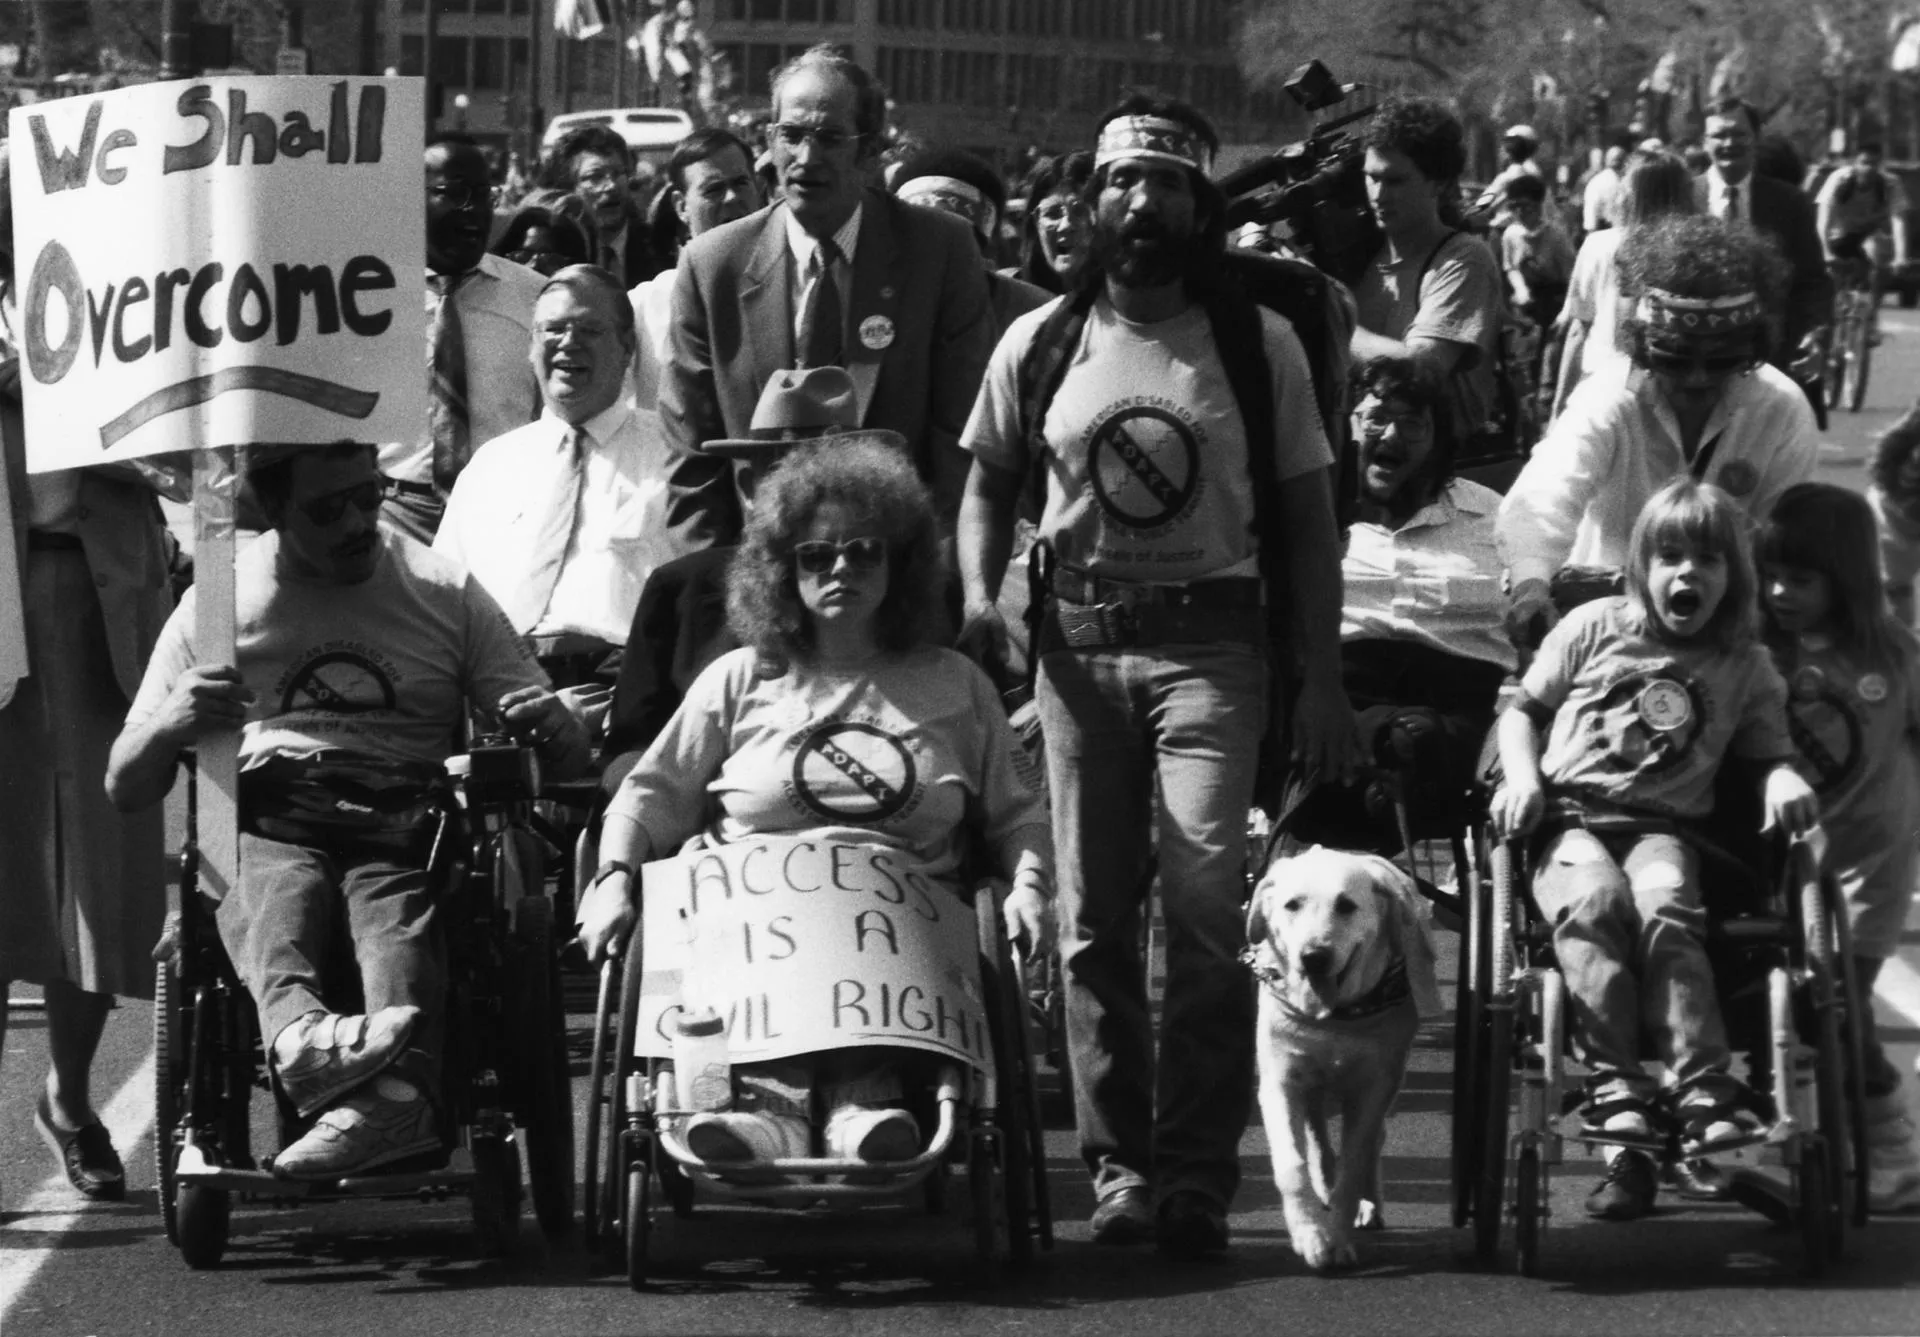 Protest sign that reads We Shall Overcome! March of adult and children protesting. Protestors are in wheelchairs, using service animals and walking.